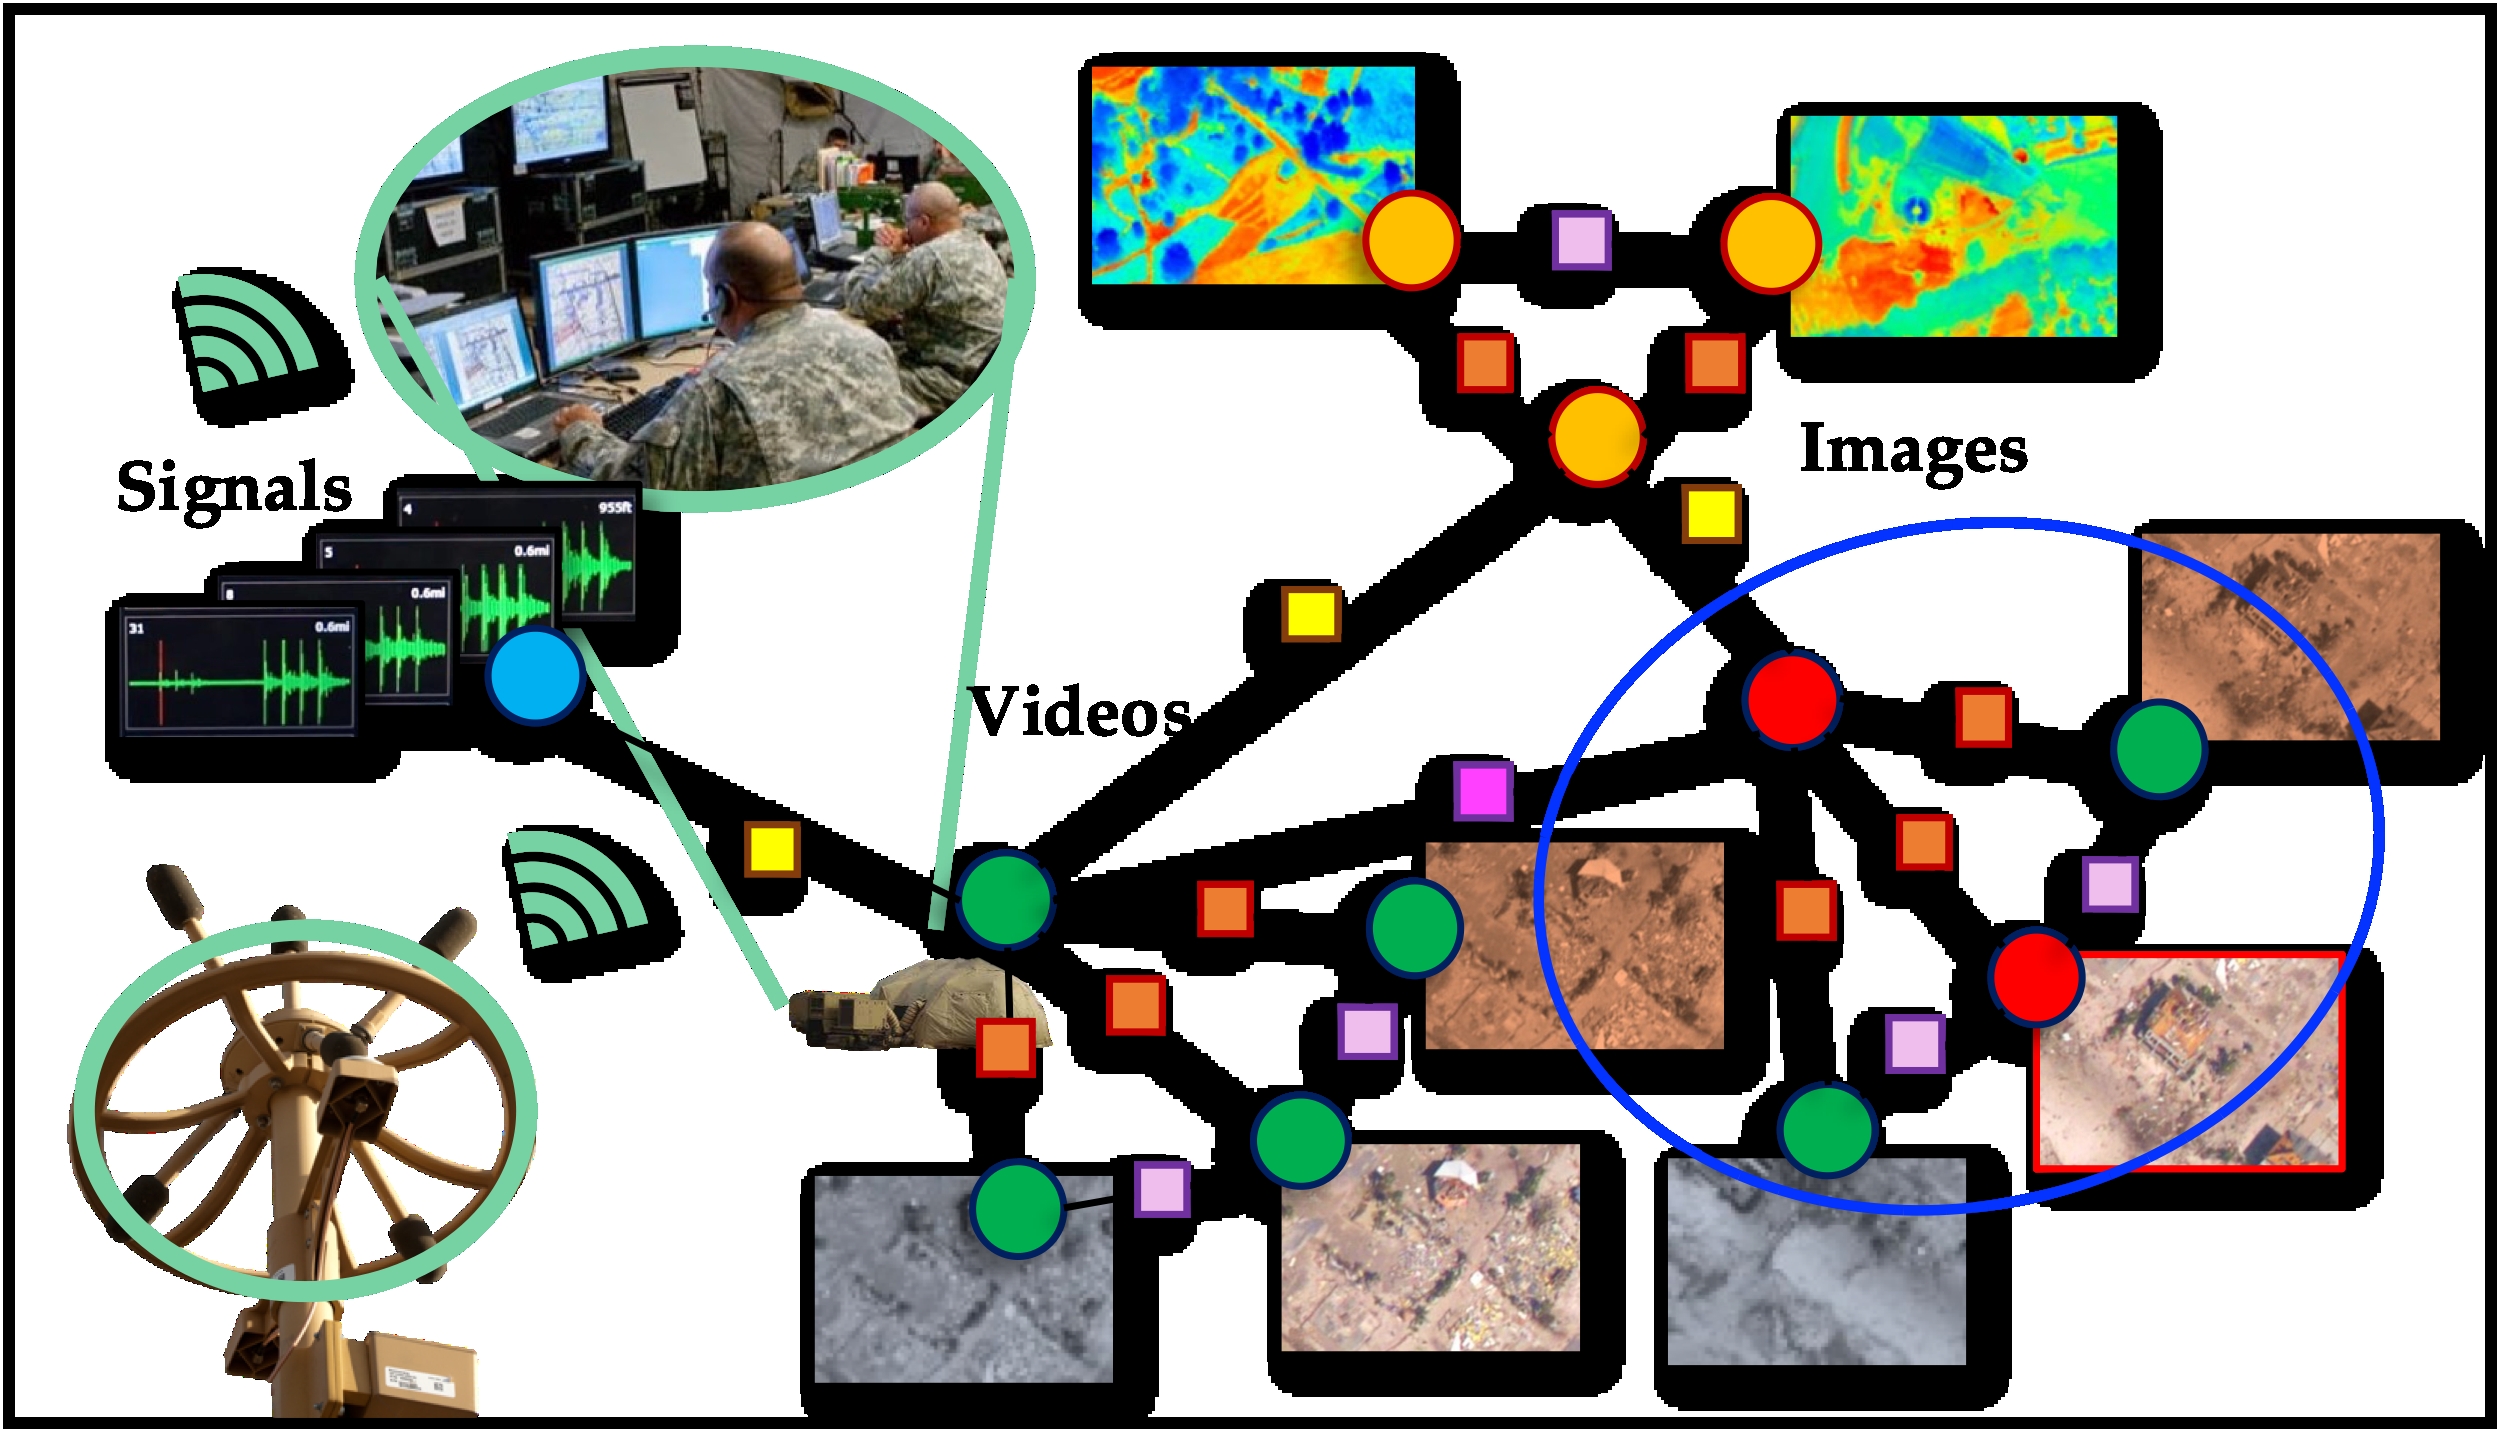 Human-in-the-loop Intelligence for Efficient Umanned Vehicle Operations